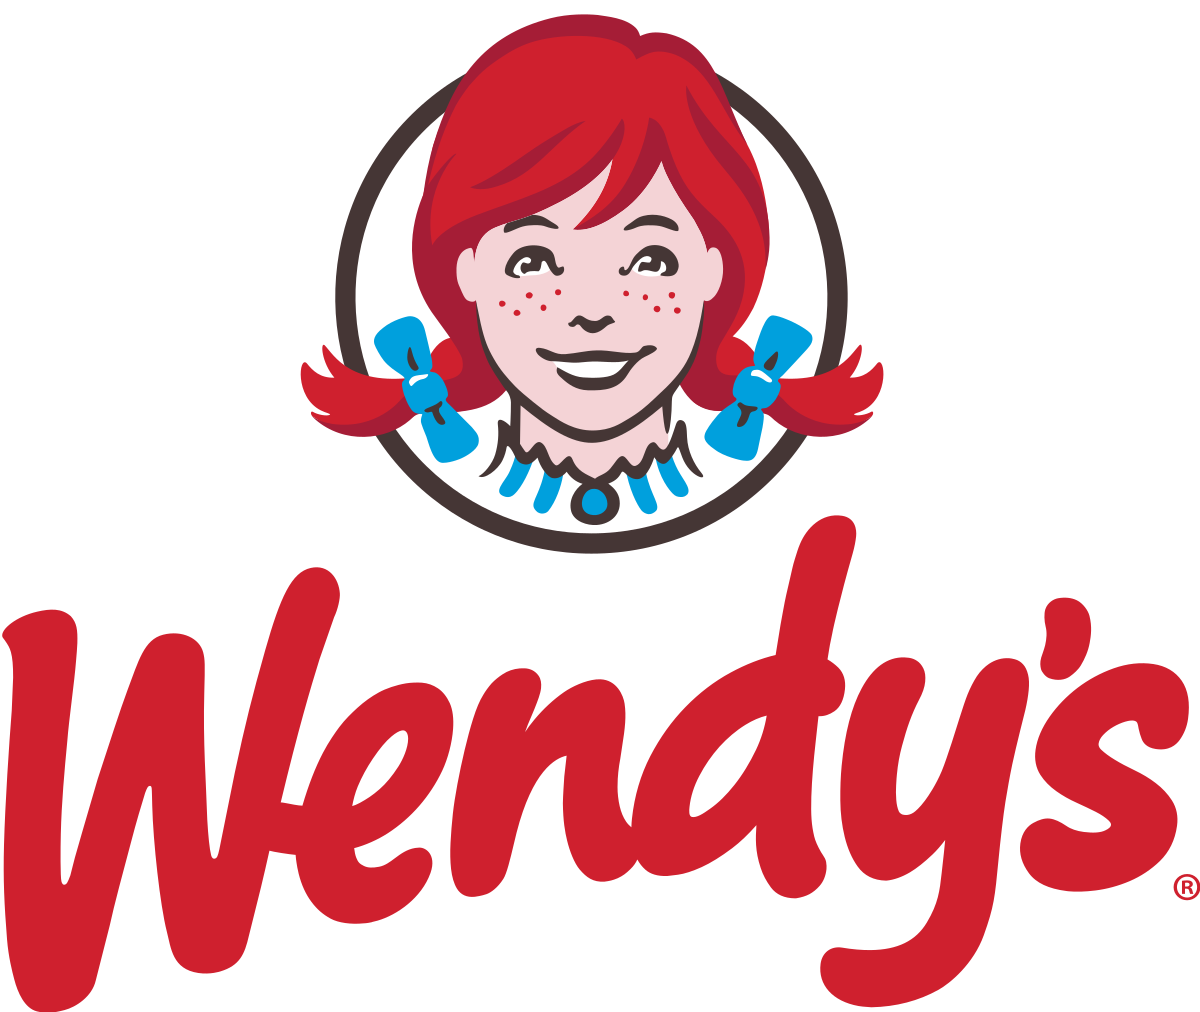 Wendy’s Implements Chatbot To Take Drive-Through Orders